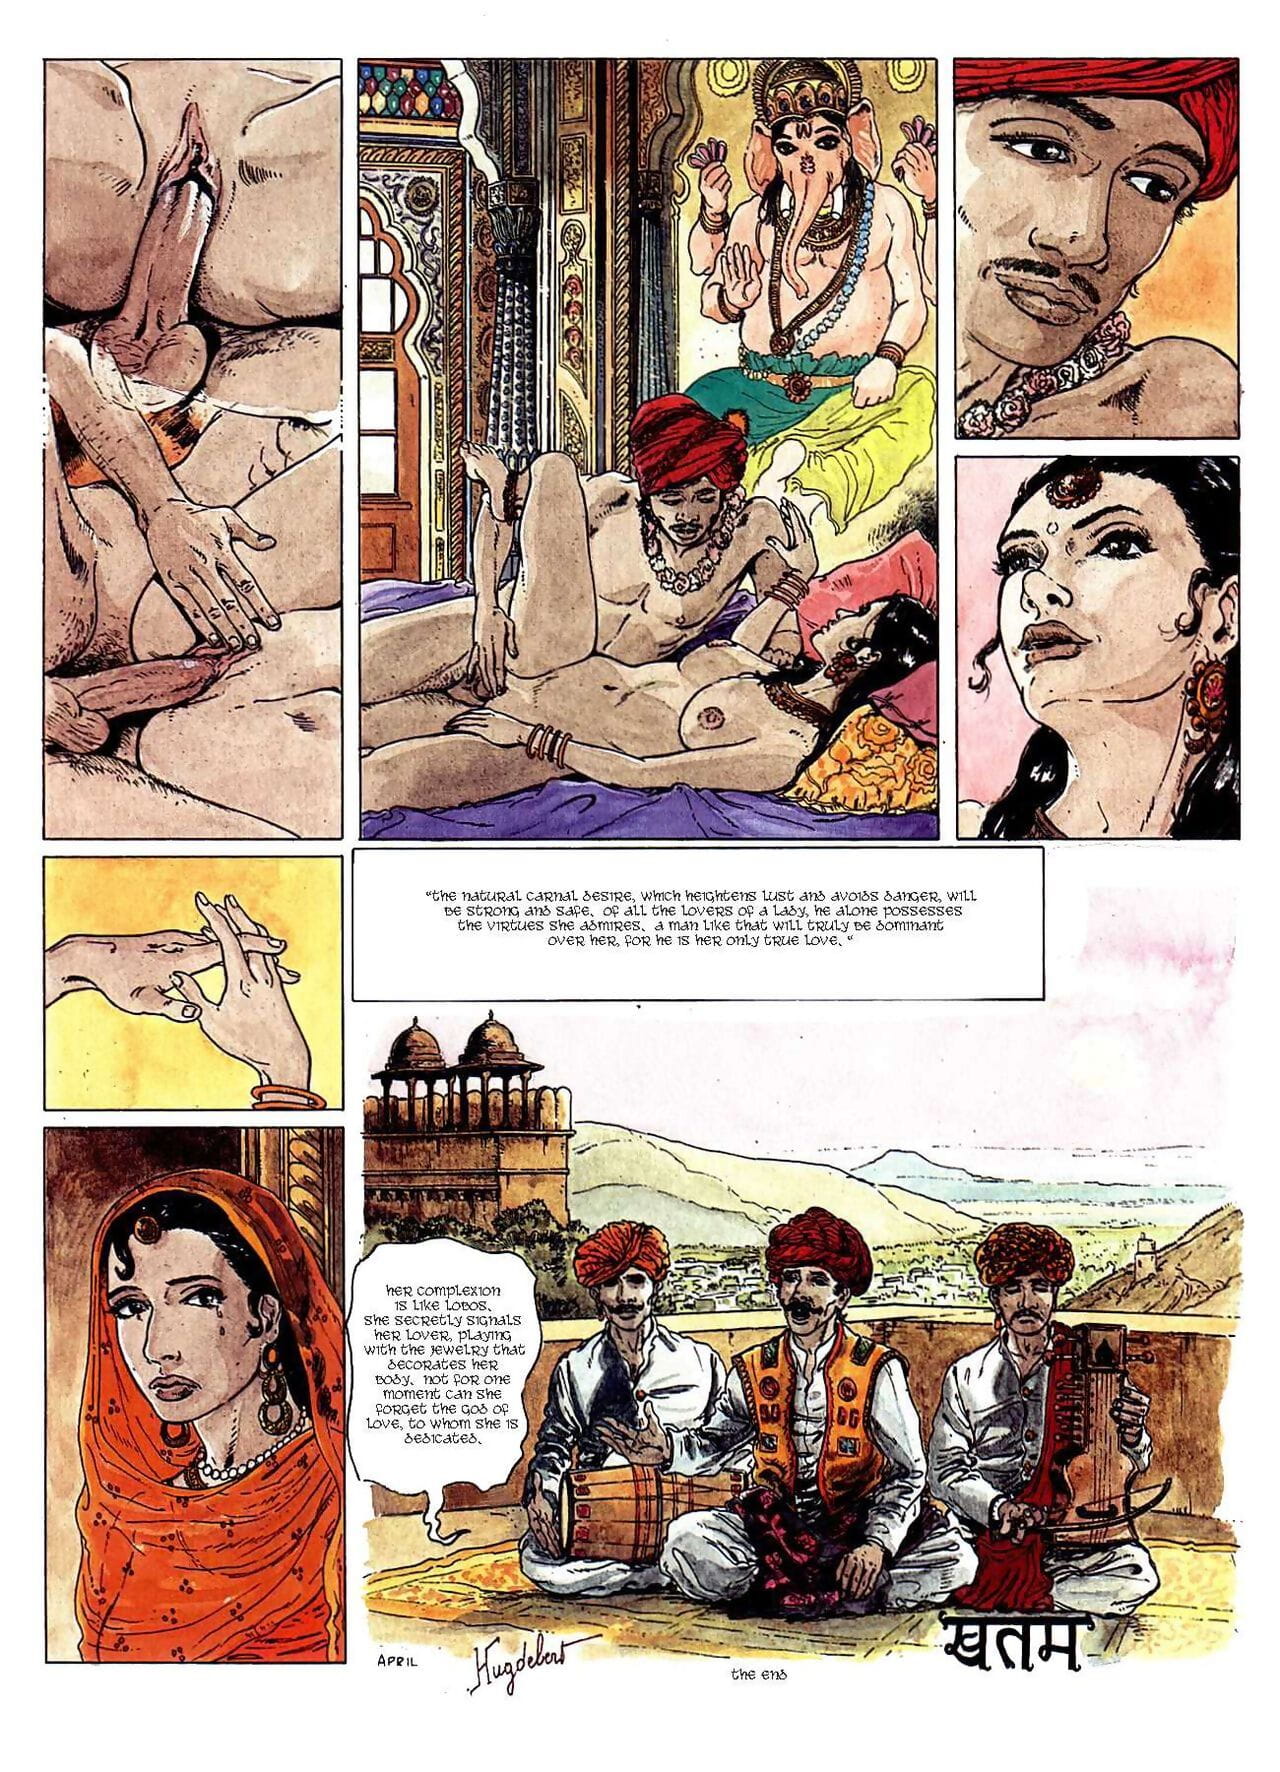 Kama-Sutra - part 2 page 1